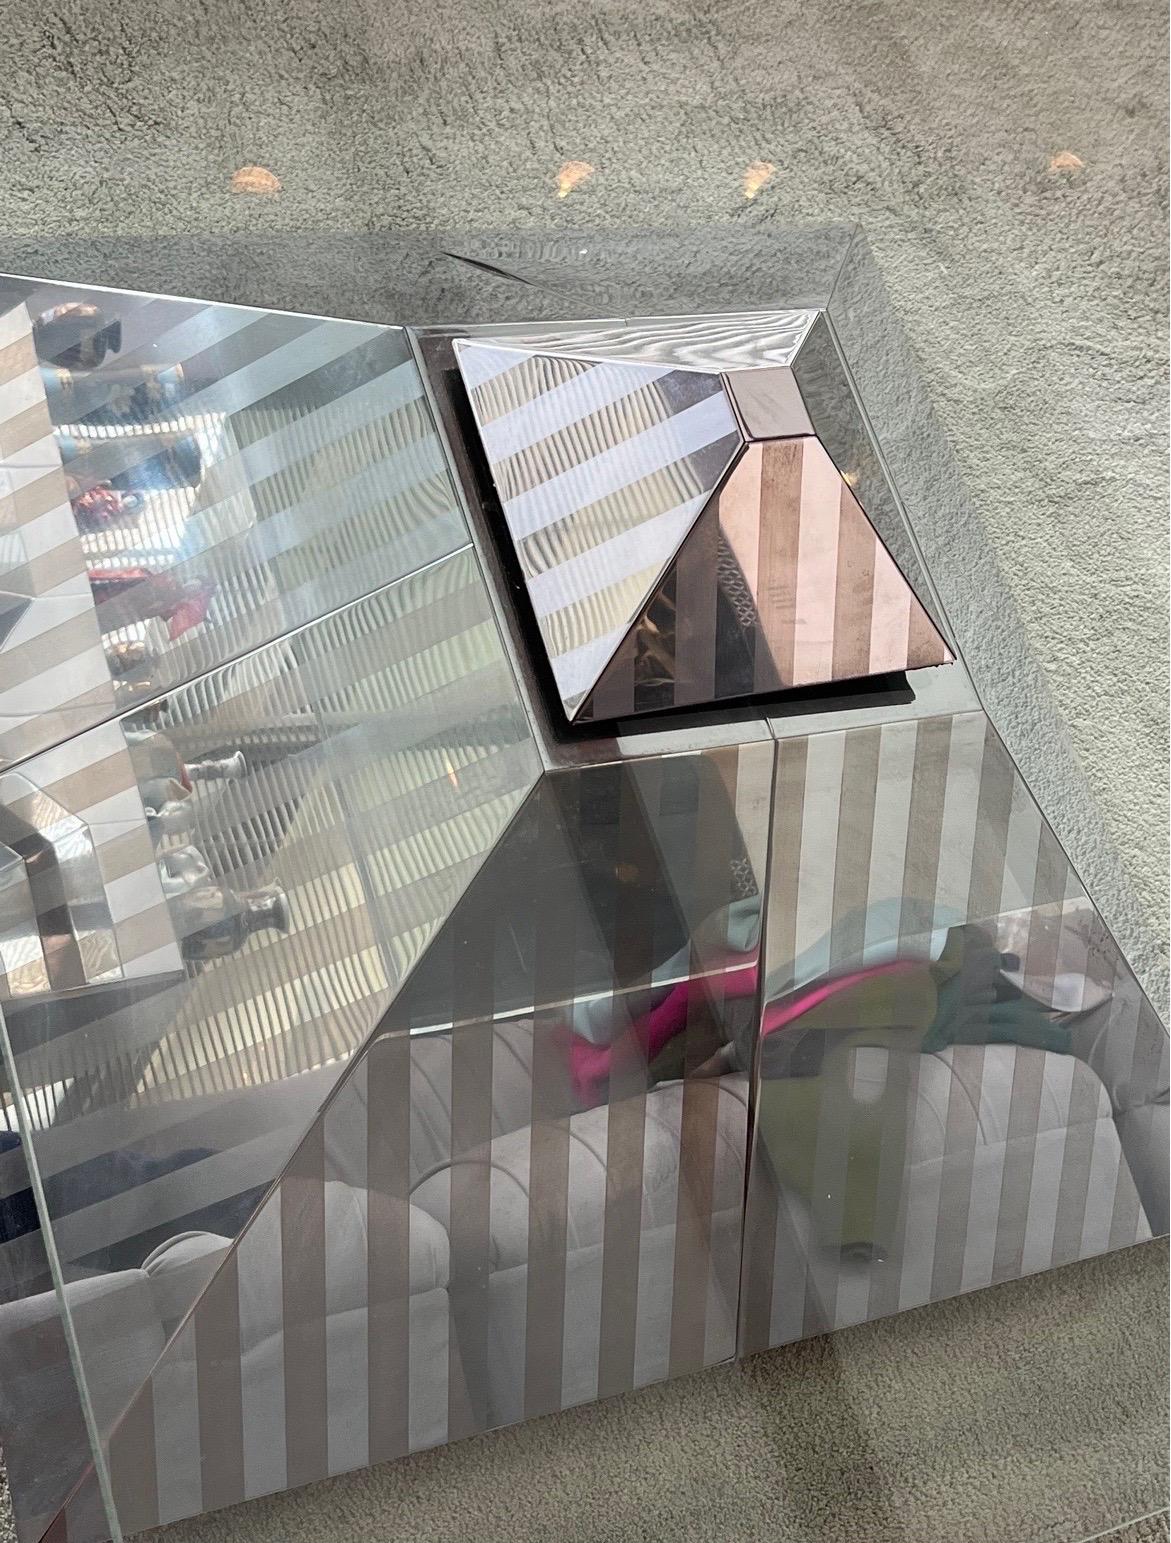 Postmorden Chrome Mirrored Pyramid coffee table, custom made in 1980. The original owner had this coffee table for over 40 years in her living room untouched.